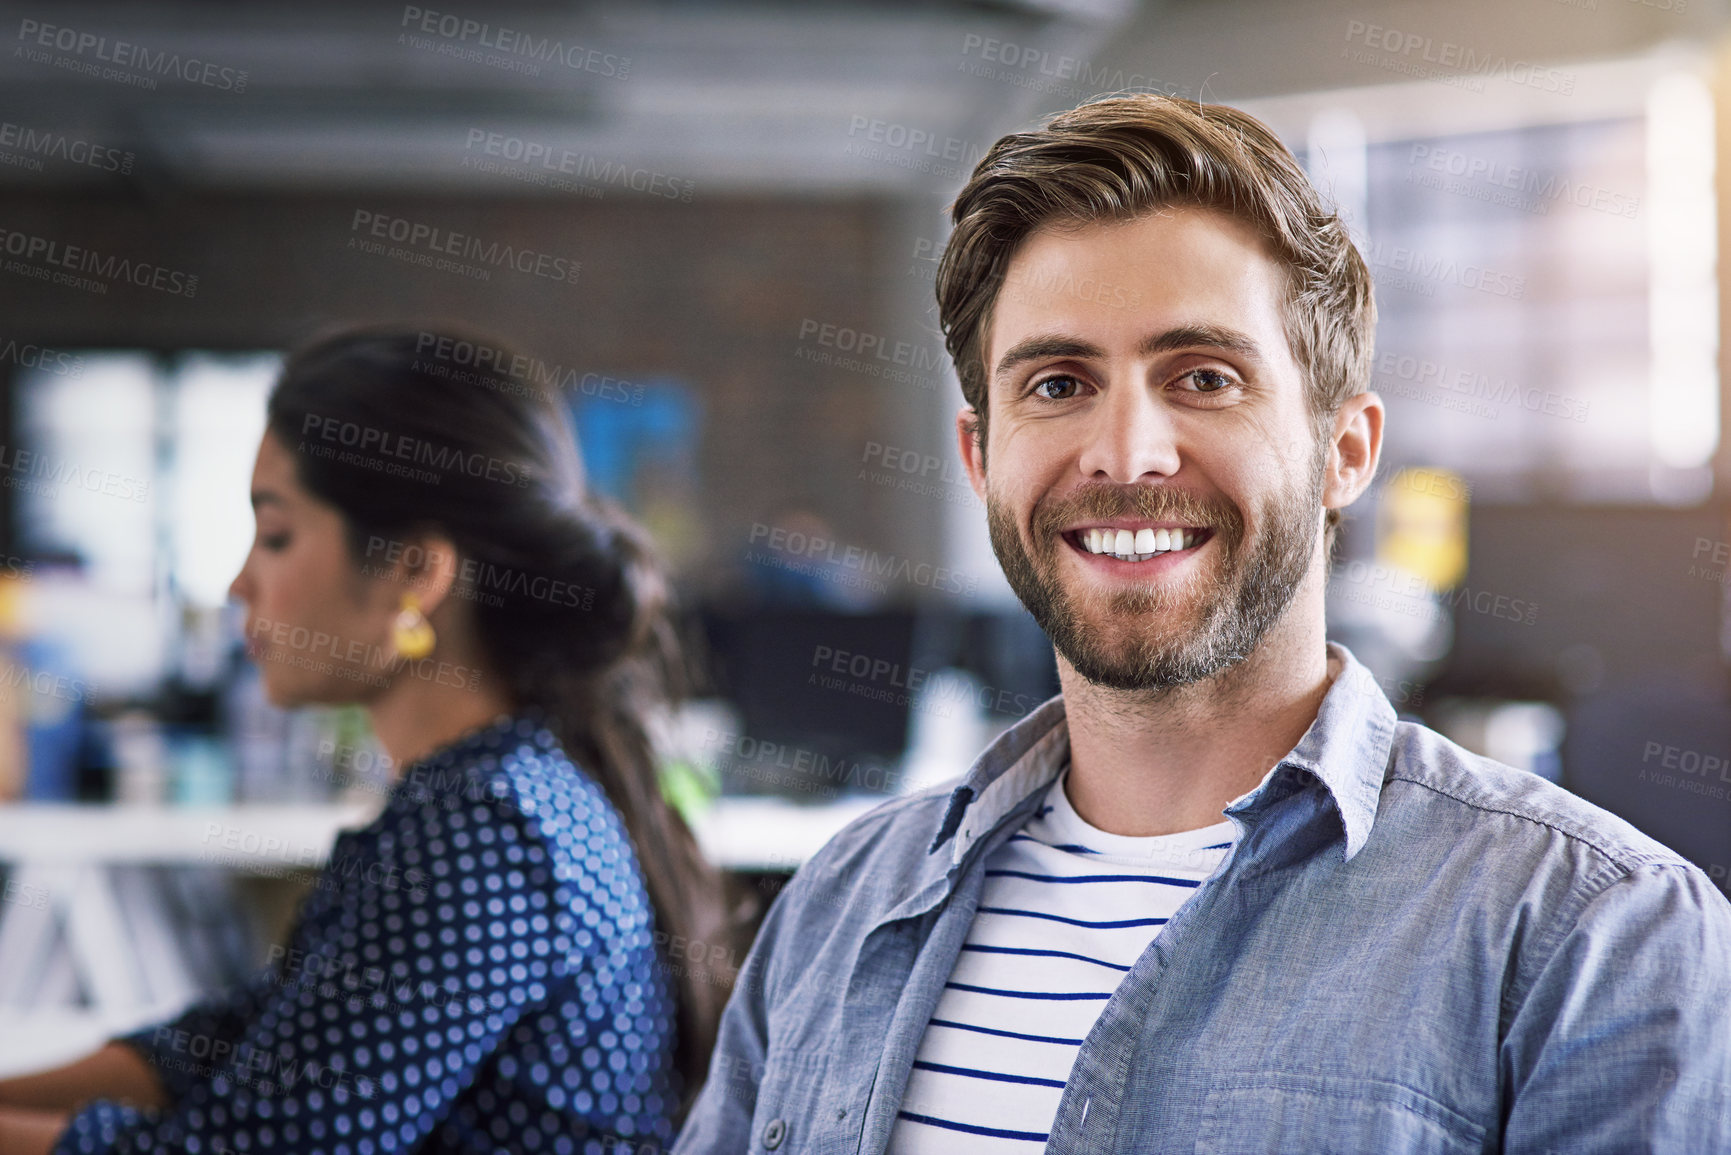 Buy stock photo Cropped shot of a creative businessperson working in the office